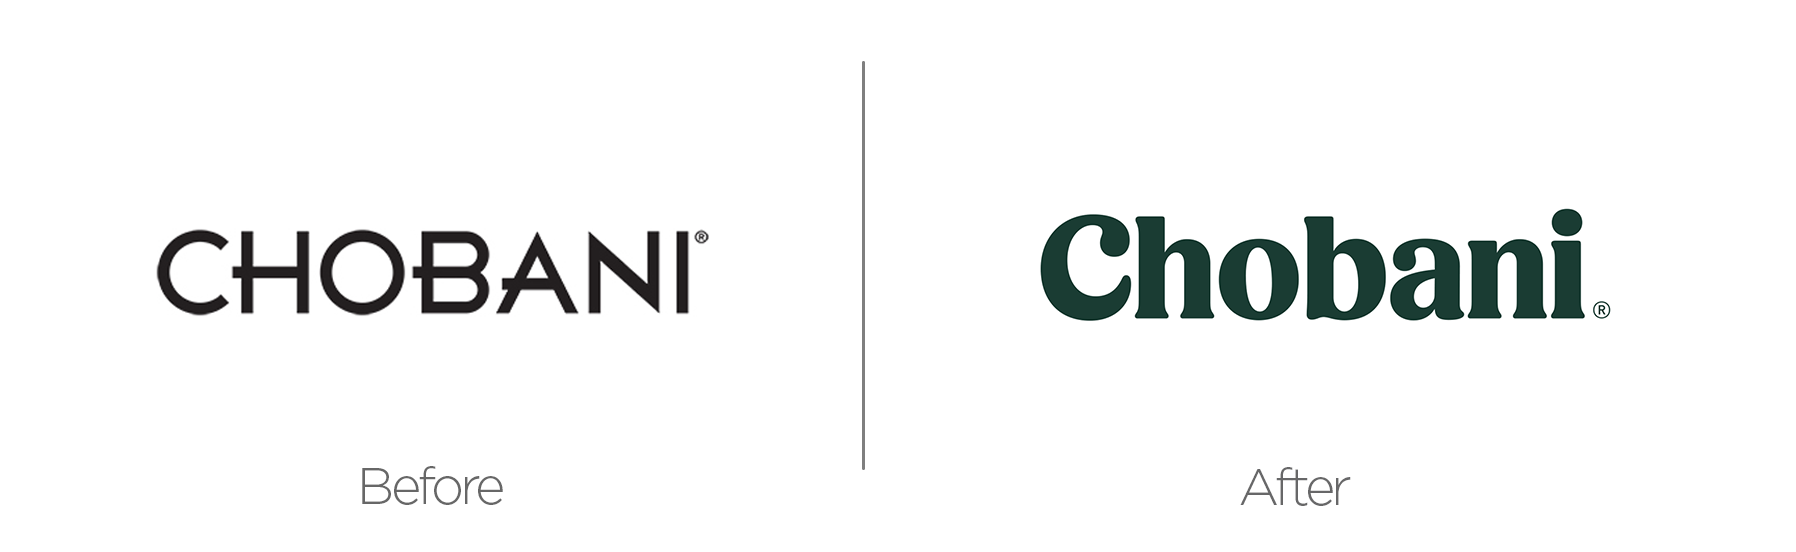 Chobani rebrand before and after